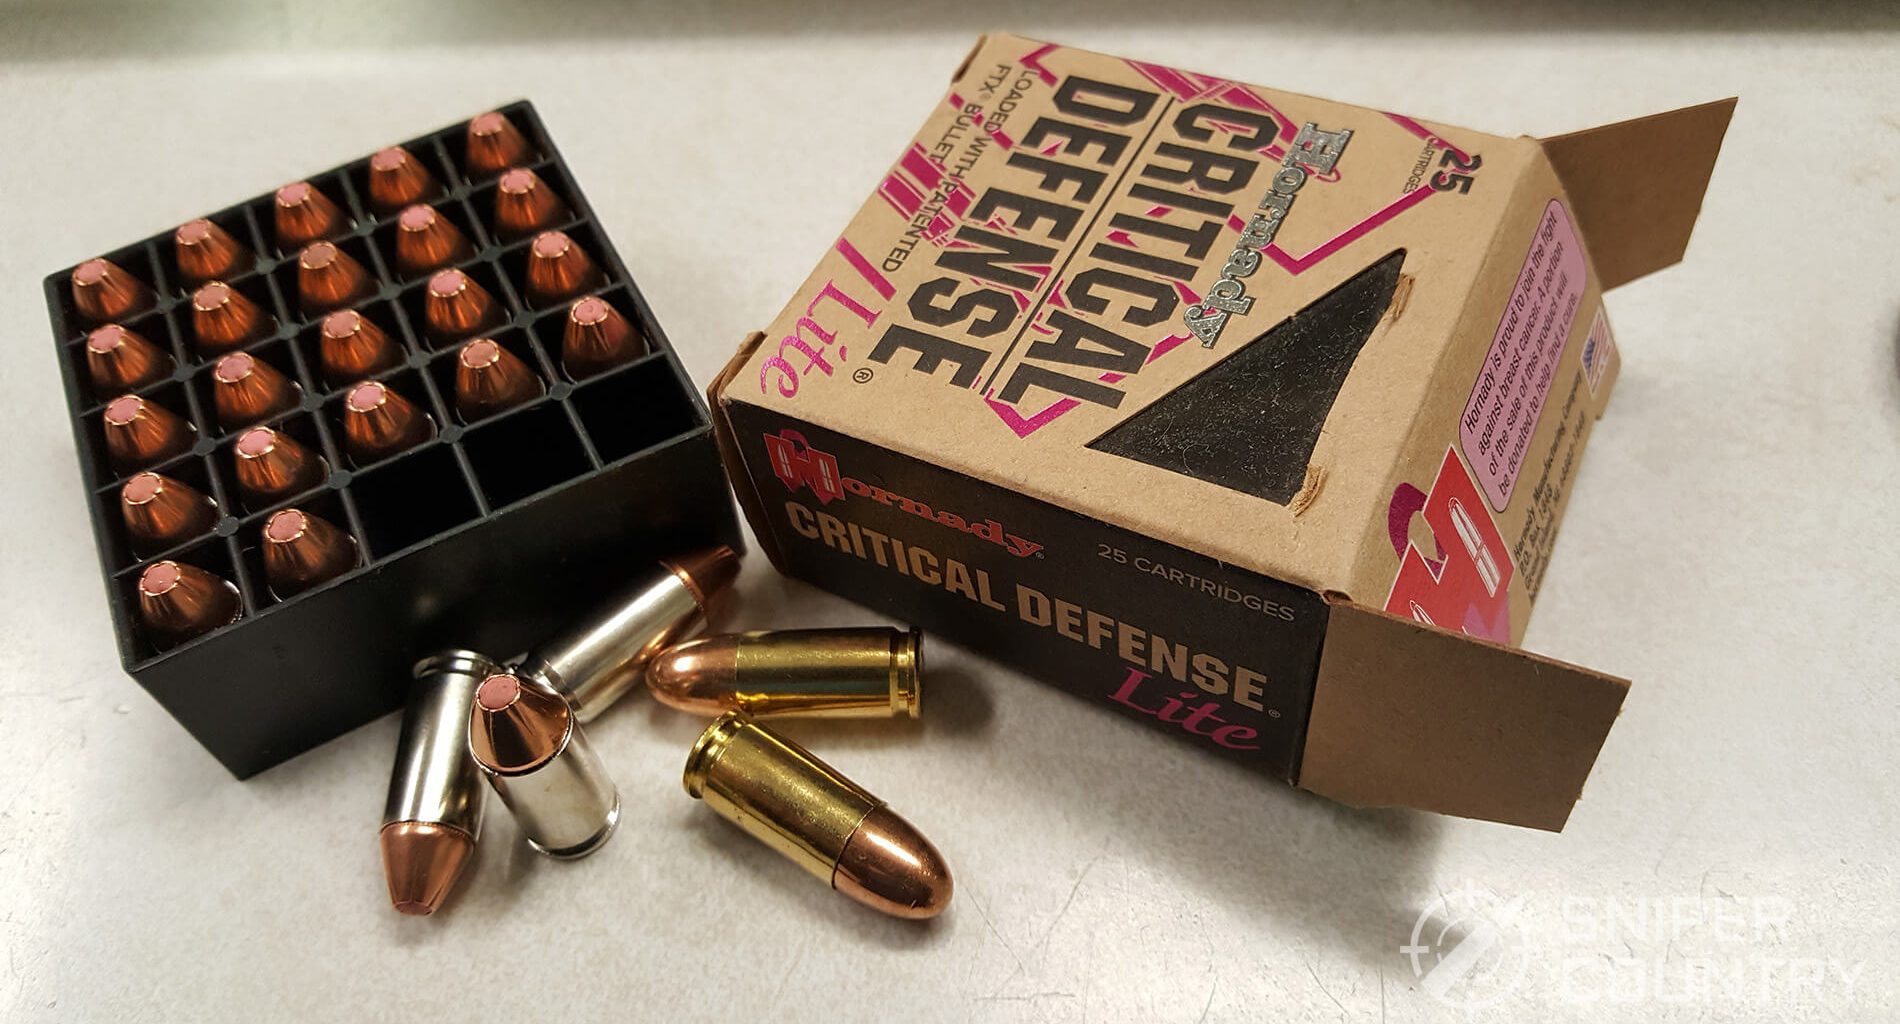 9mm Ammo for self defense